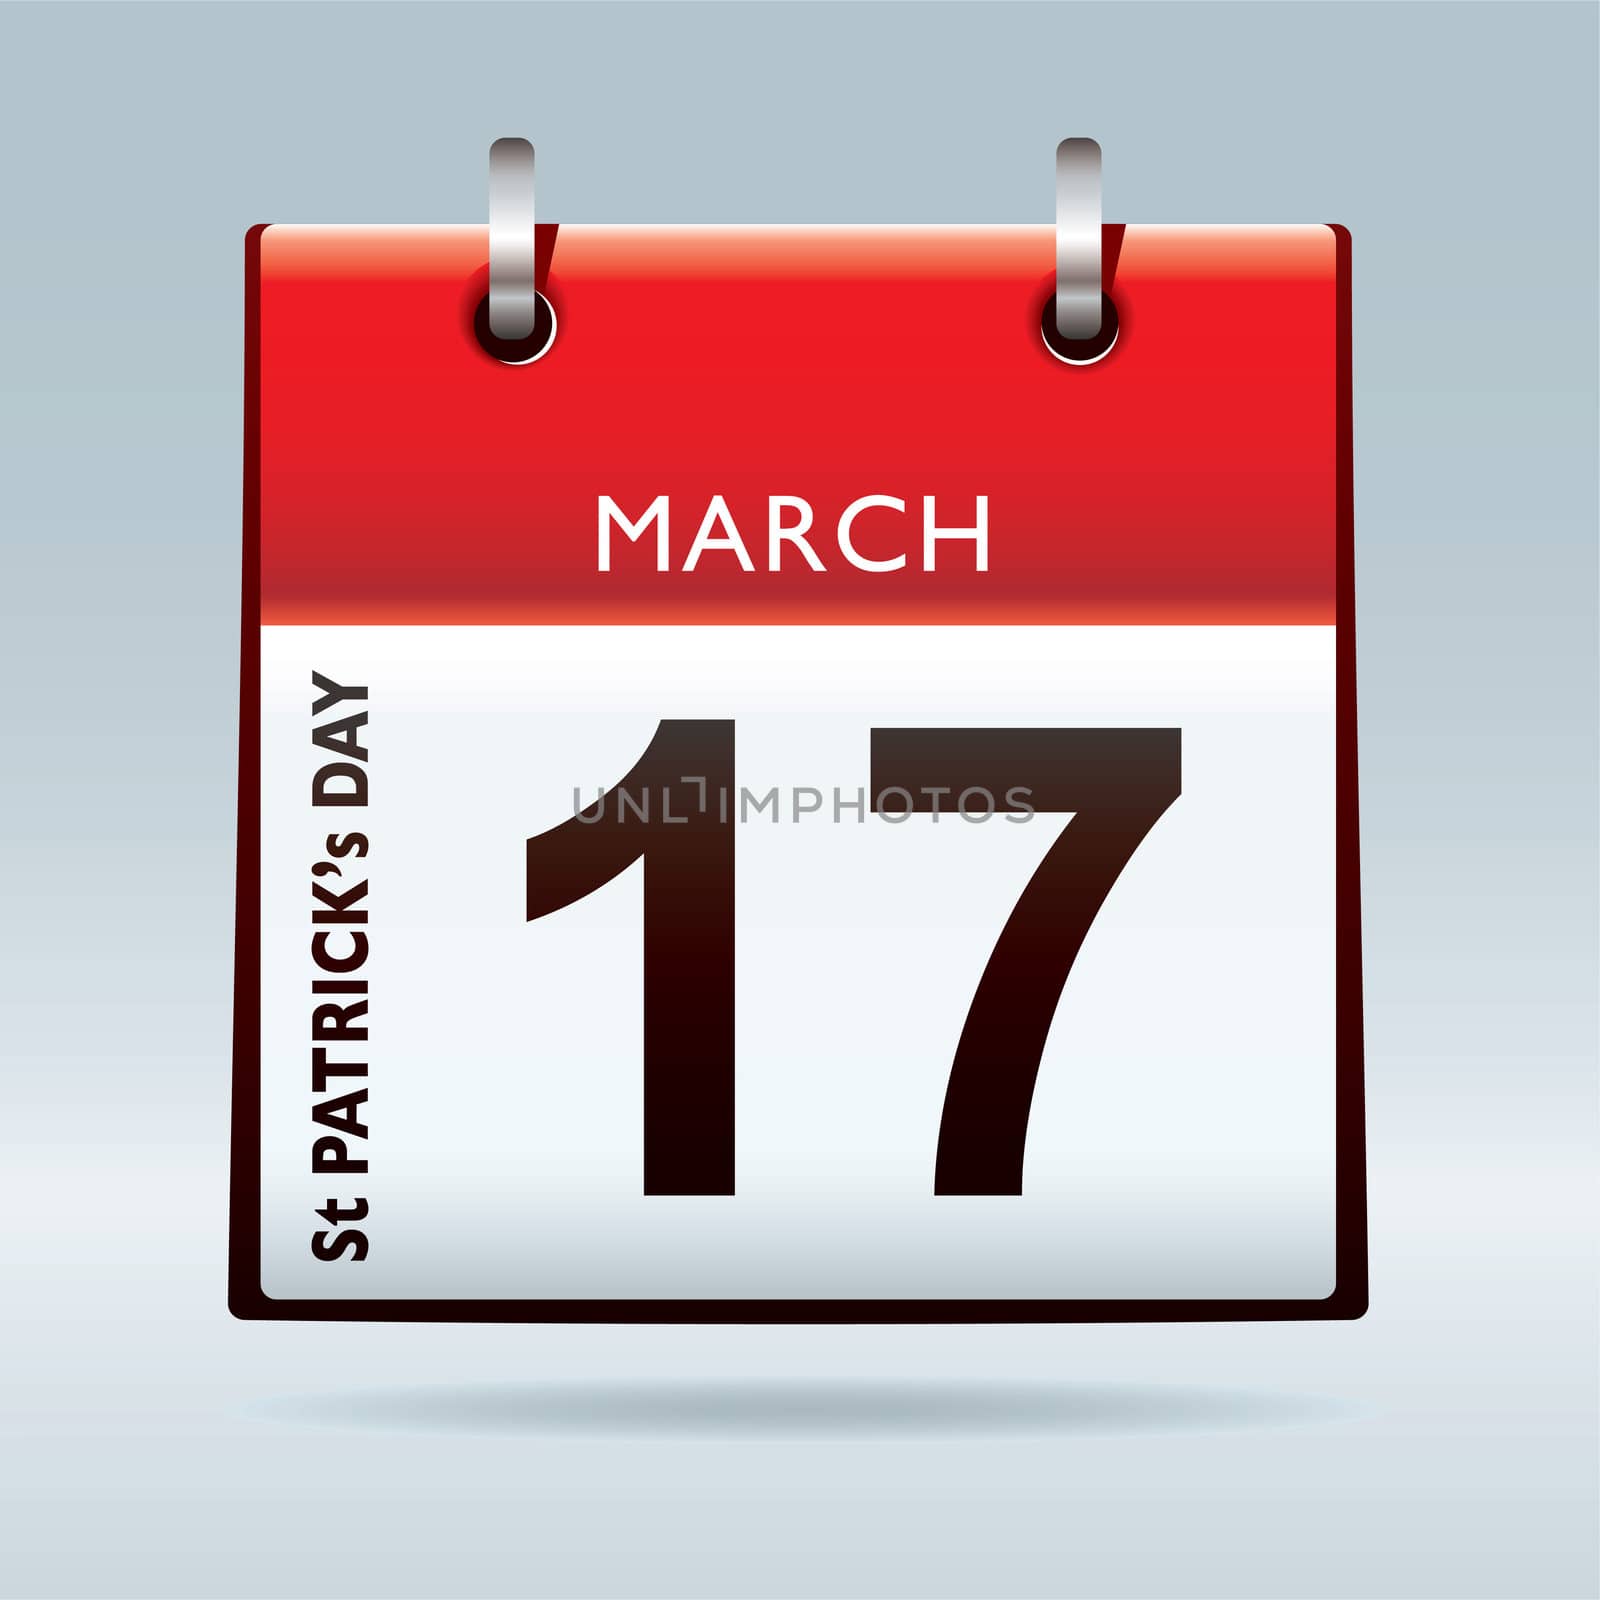 St Patrick�s Day Calendar icon with red top and drop shadow